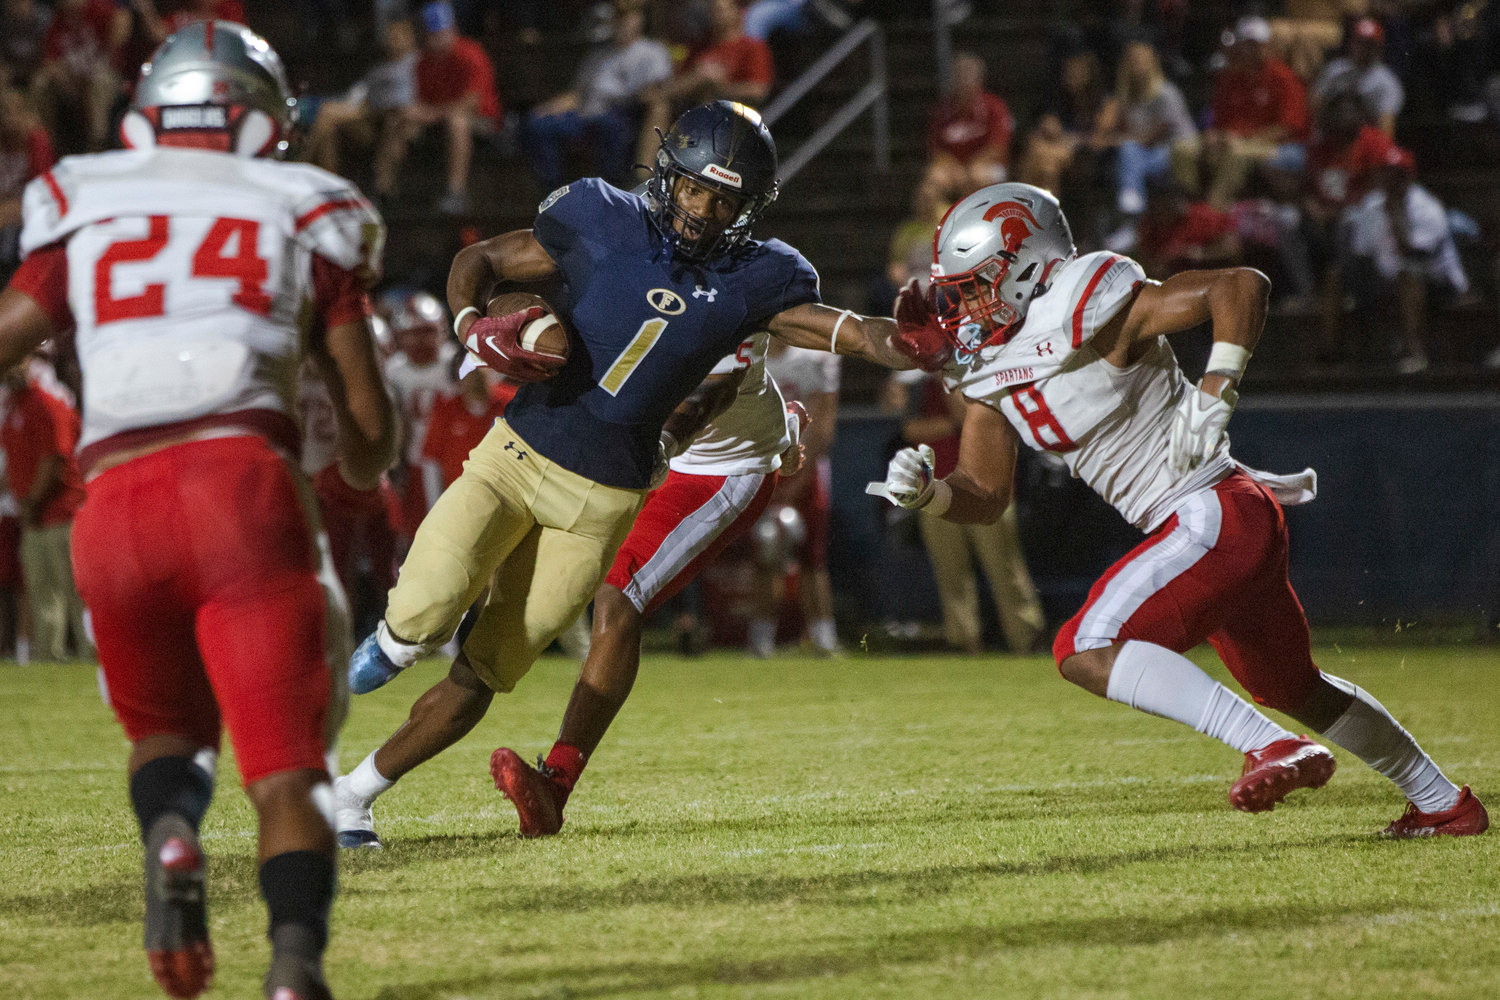 Foley receiver Perry Thompson runs with a catch during the Lions’ non-region game against the No. 3 Saraland Spartans at Ivan Jones Stadium Friday, Sept. 23. The Alabama commit threw a touchdown to Makai Mitchell and caught nine passes for 87 receiving yards in Foley’s 49-21 loss.